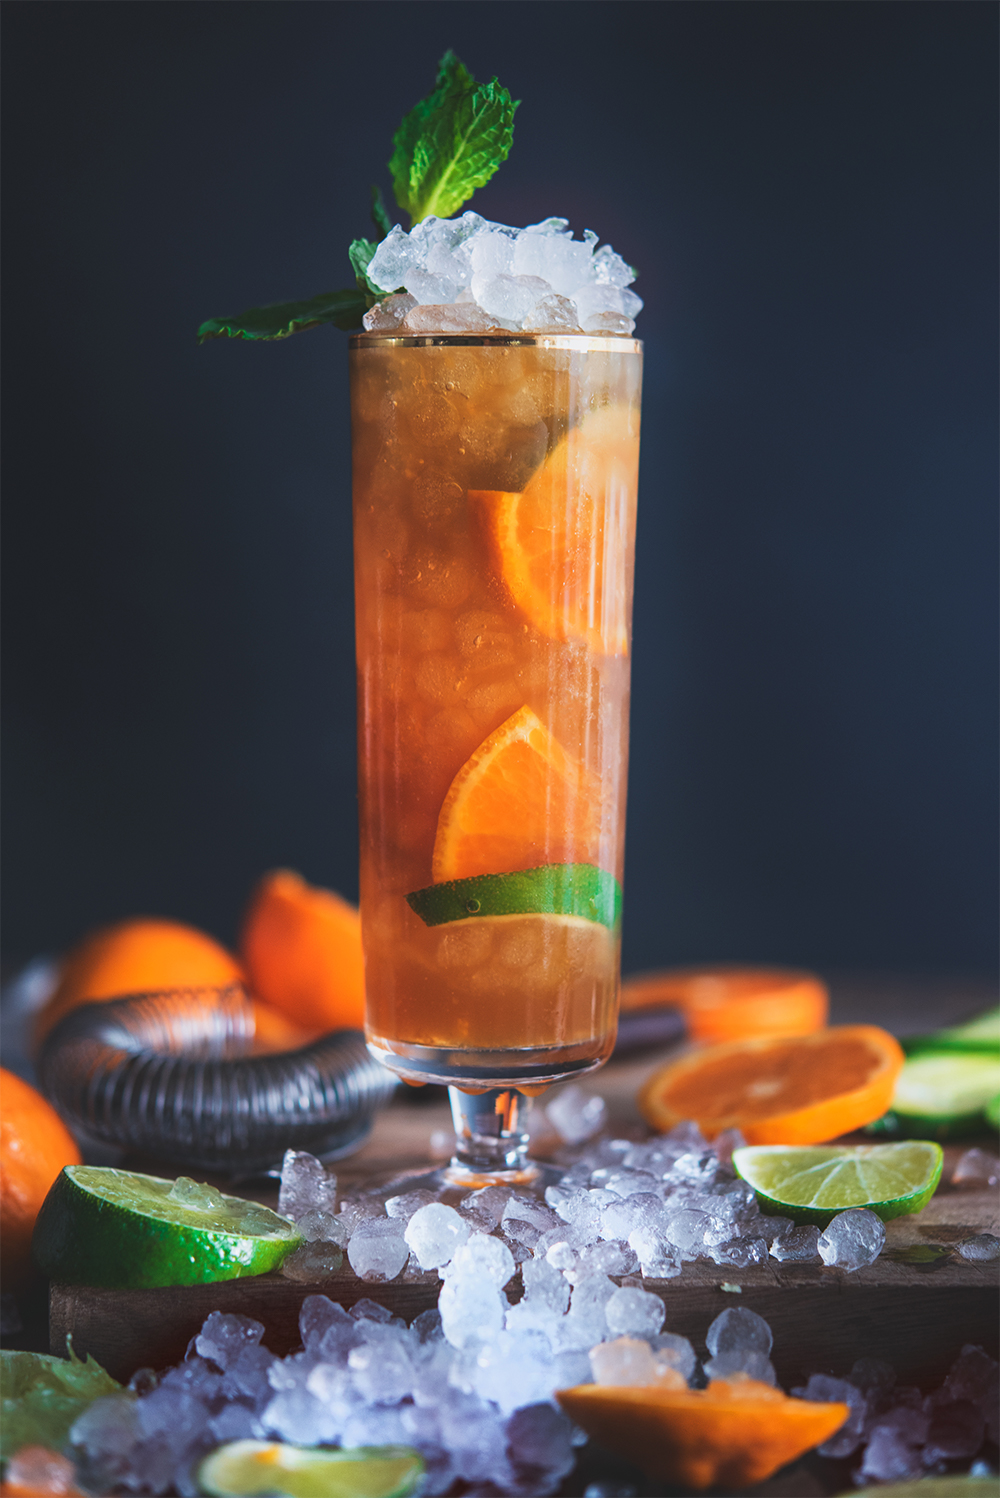 Last but certainly not least, here is the same drink prepared, styled and photographed by Silas @fullframefoodie. His versions really captures the freshness of this recipe and puts you right there smack dab in the middle of Pixie Pimm's Cup heaven. 